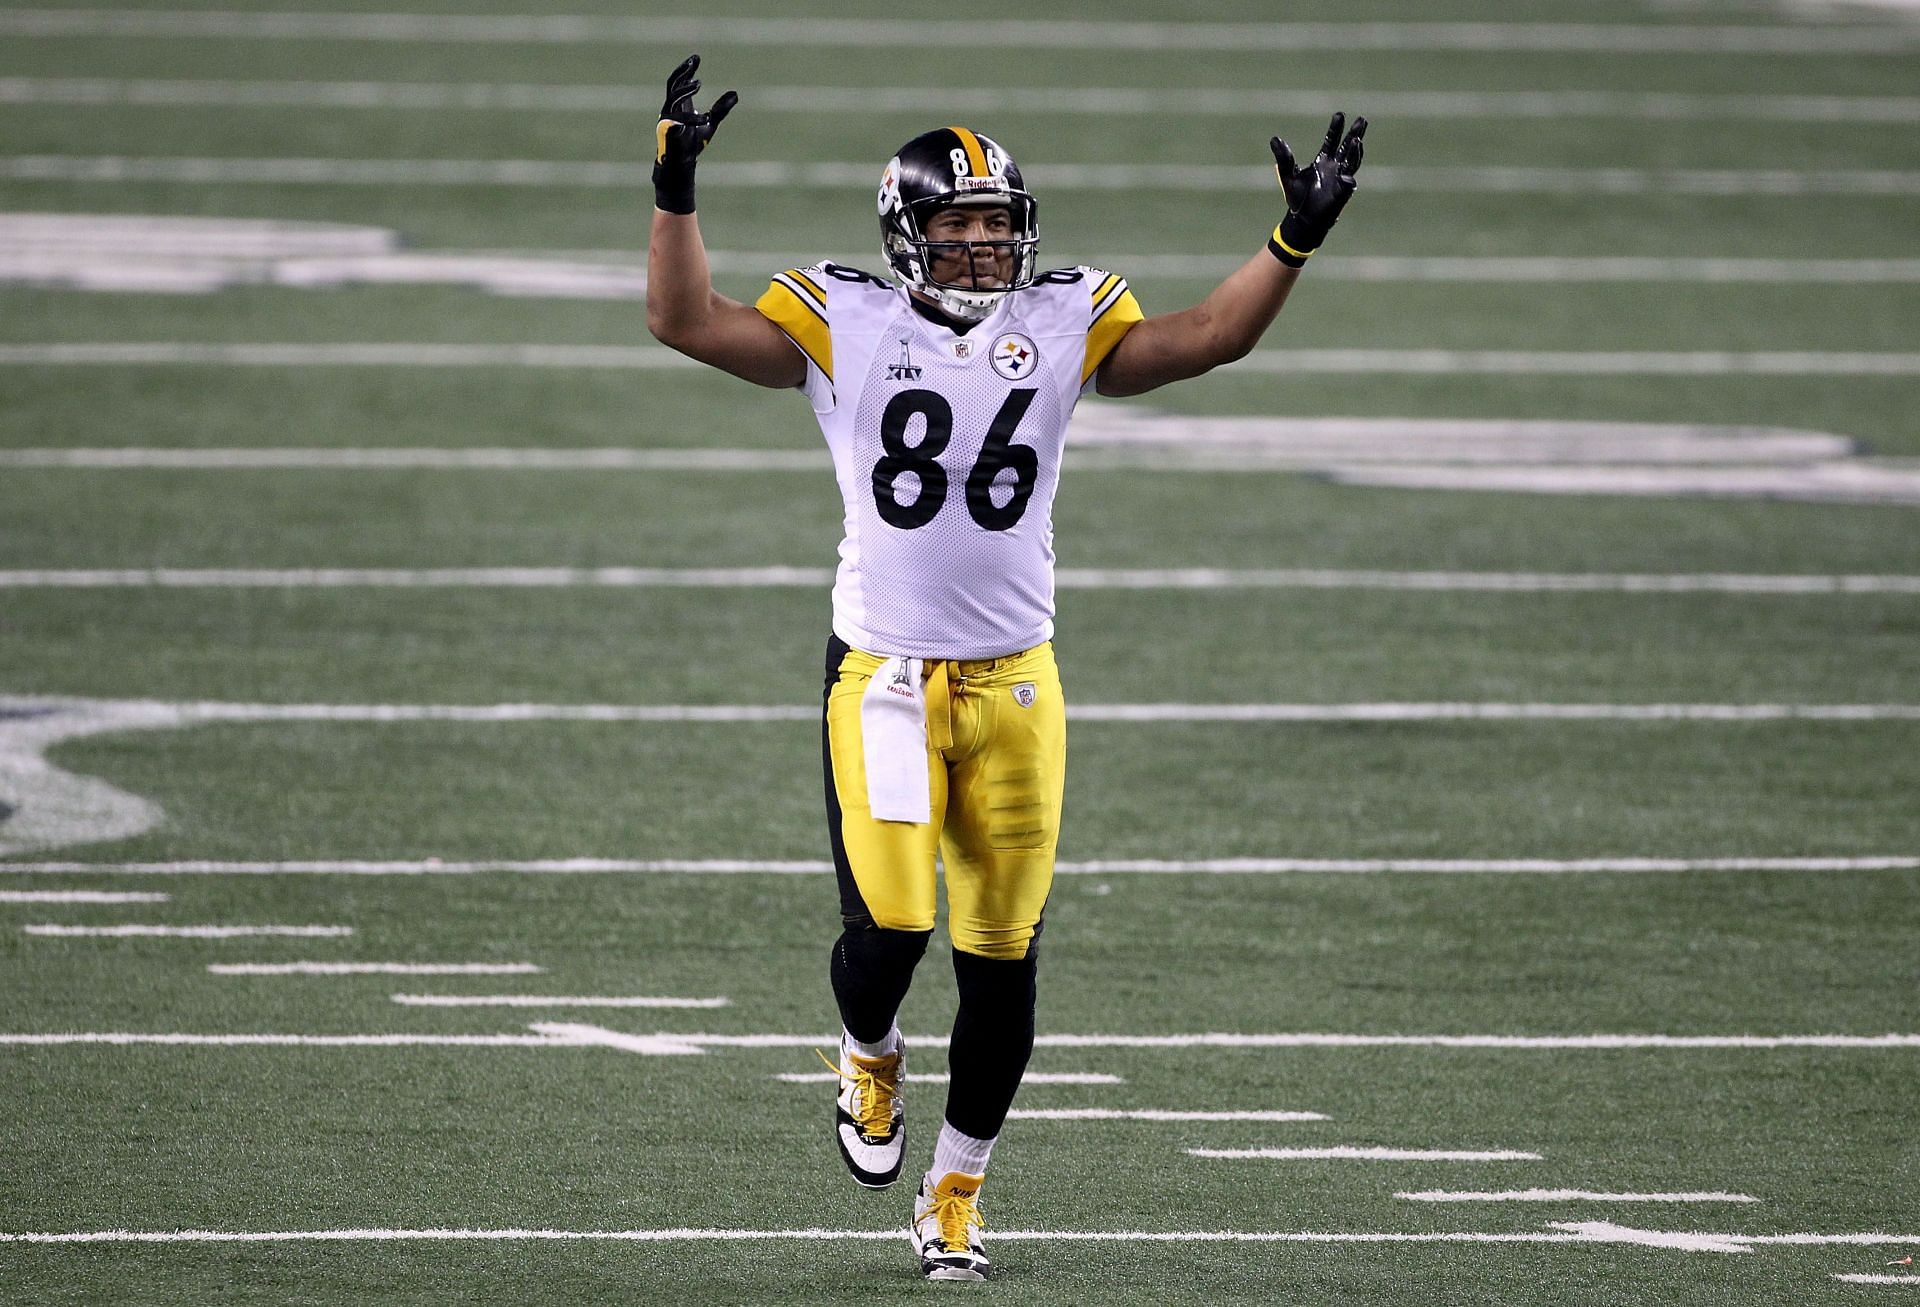 Hines Ward, seen during Super Bowl XLV, was part of the finest Steeler squads at the turn of the century (Photo: Getty)